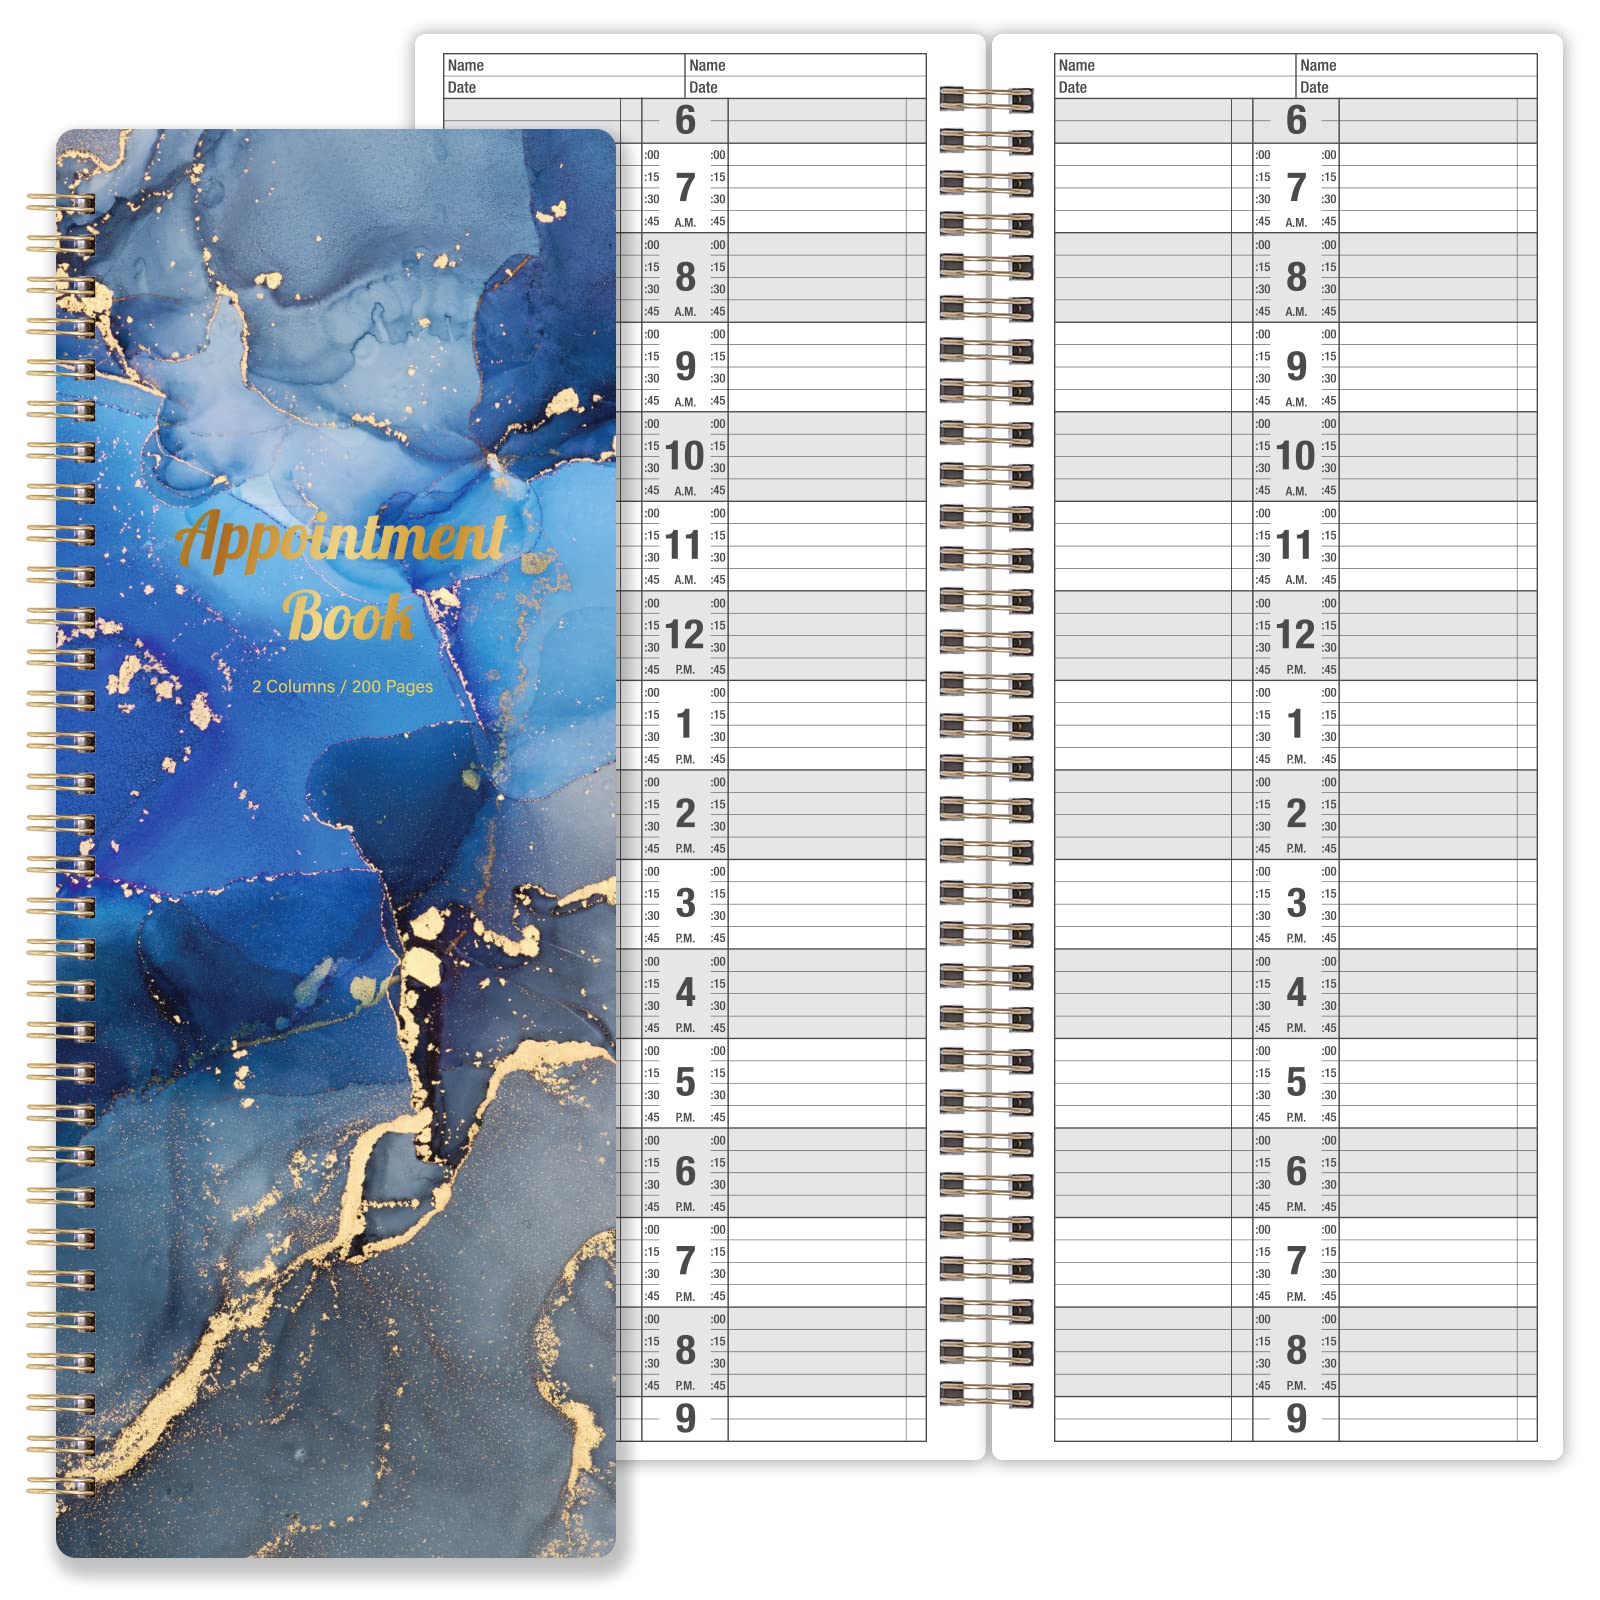 Poluma - Salon appointment book, 11.5" x 4.7", 2 Columns Undated , 6 AM - 9 PM, Twin-Wire Binding, 200 Pages for Hair Stylist - Blue